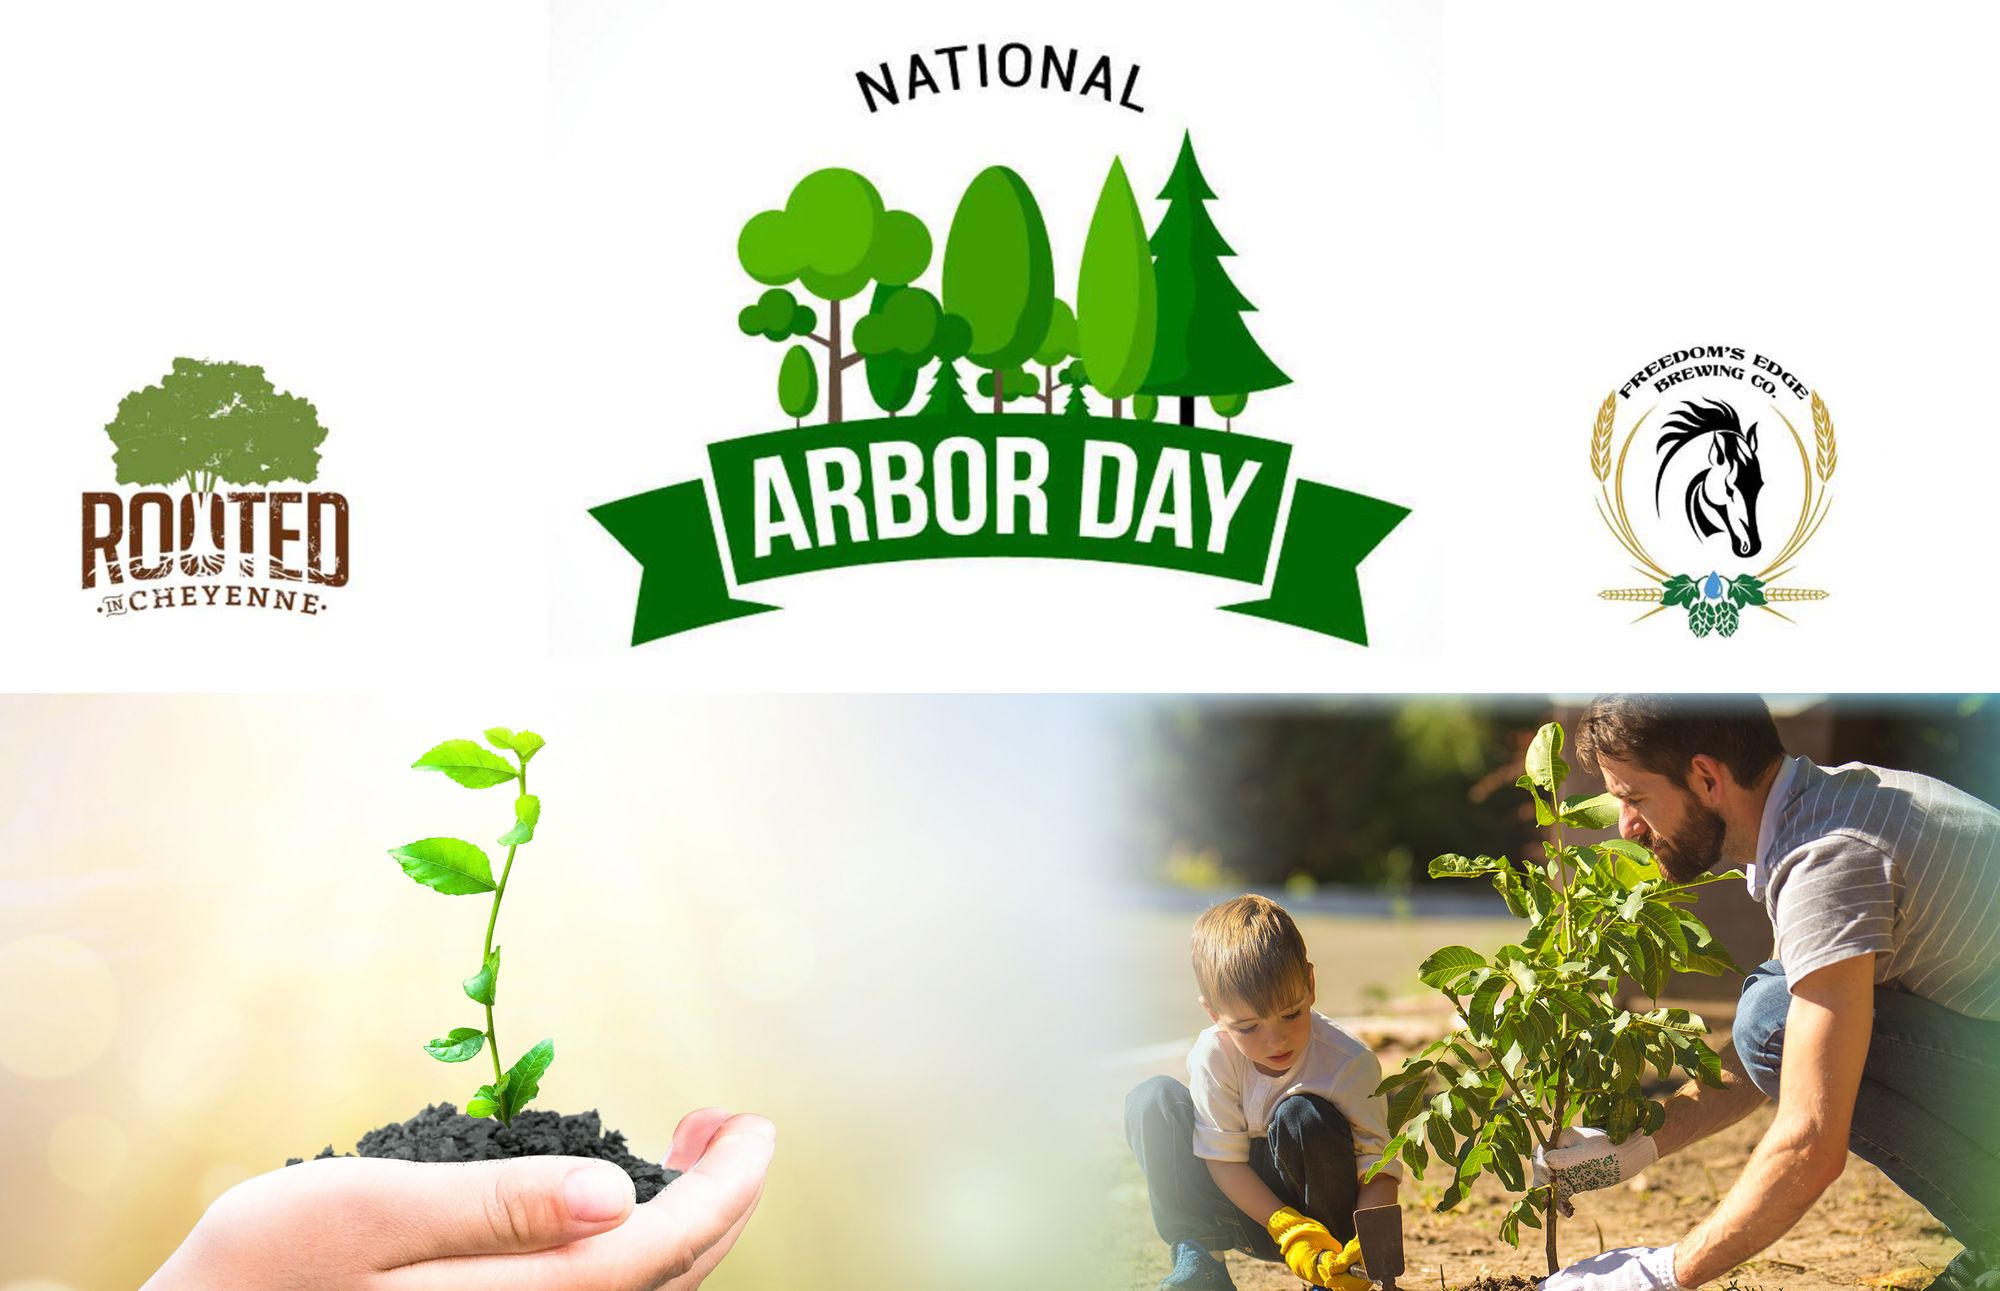 Rooted in Cheyenne Teams Up With Freedom's Edge To Celebrate National Arbor Day